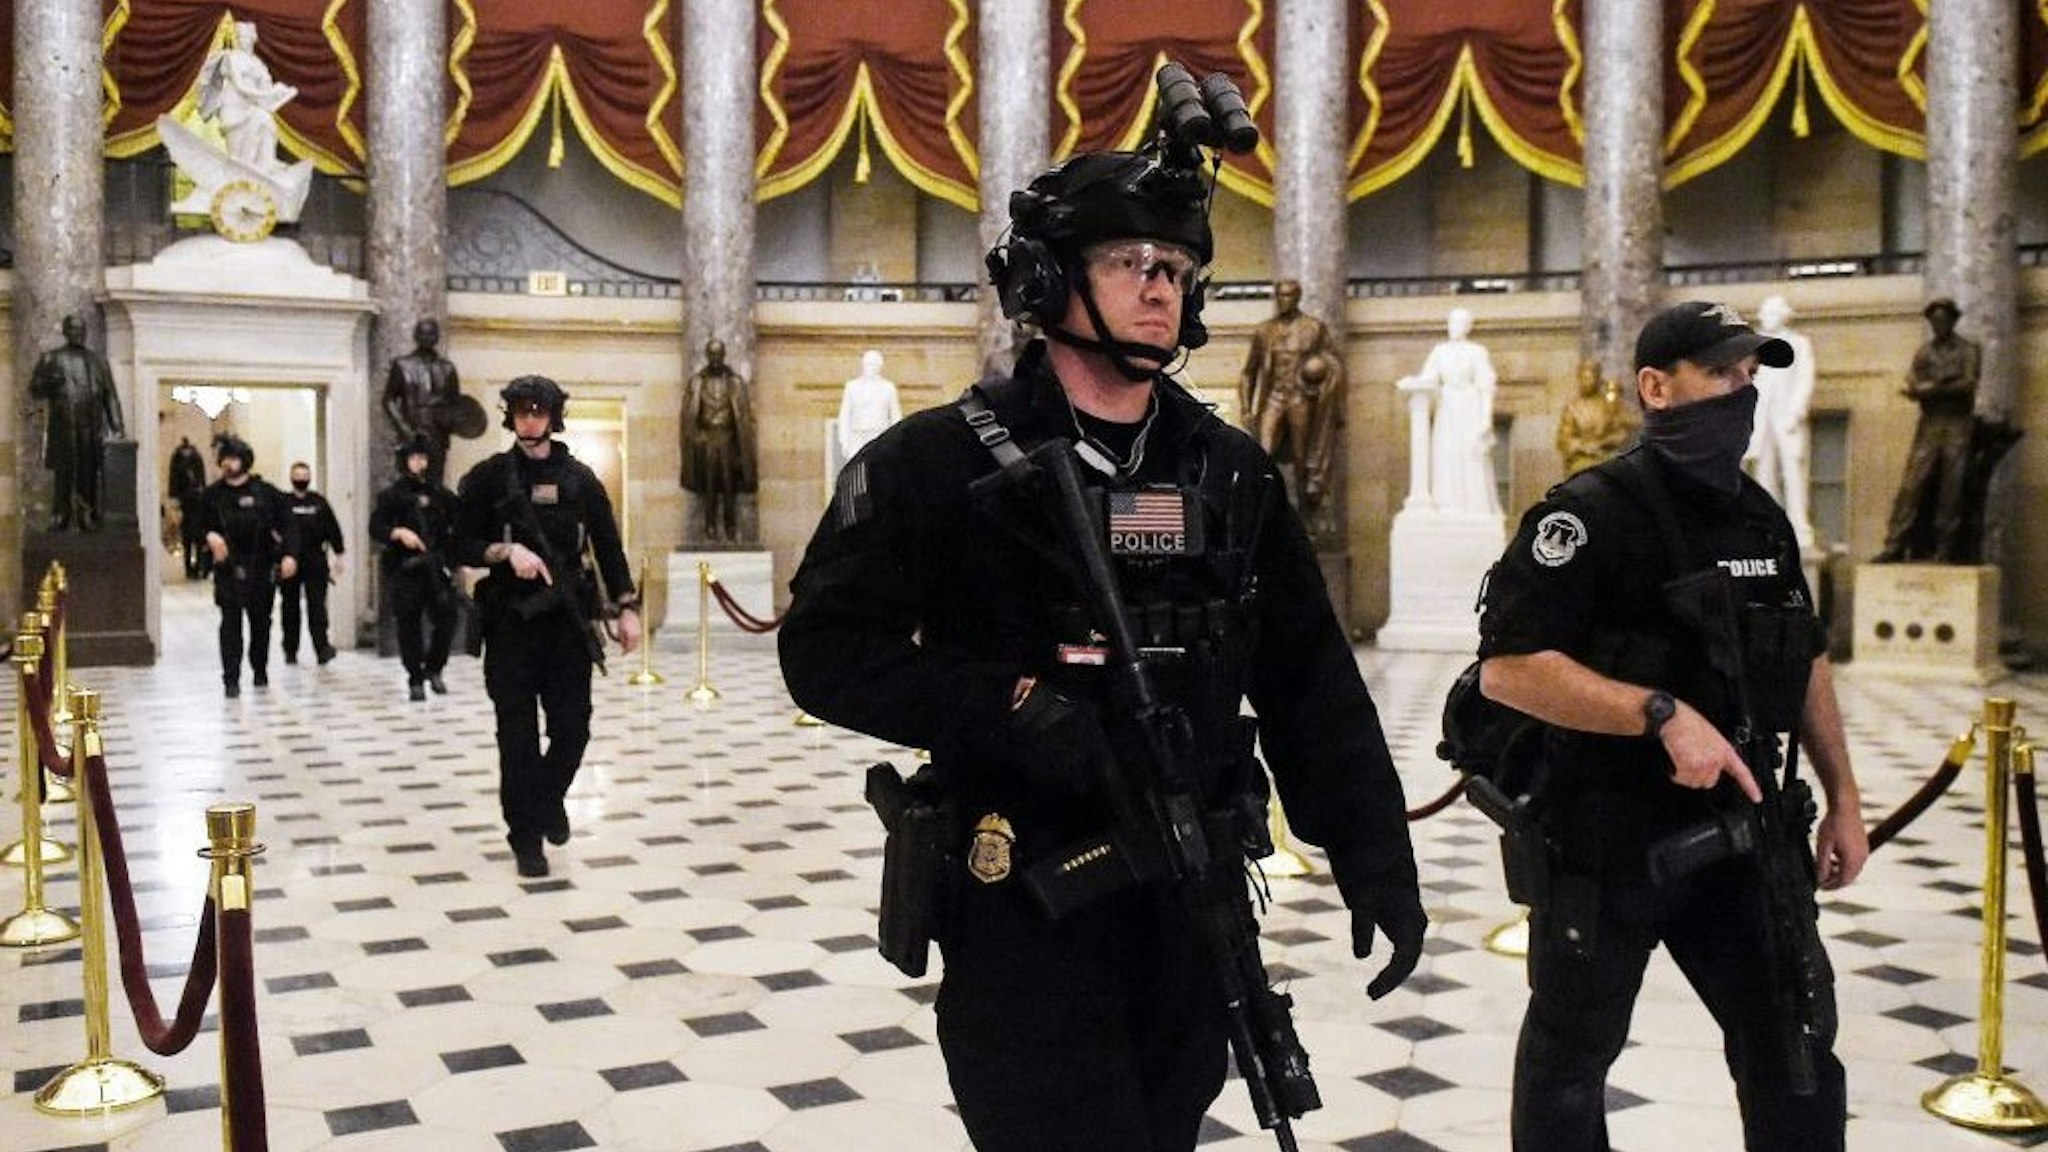 Members of the Swat team patrol and secure the Statuary Hall before US Vice President makes his way into the House Chamber, at the US Capitol, on January 7, 2021 in Washington, DC. - Congress was on track on January 7, 2021 to certify Joe Biden as the next US president and deal a hammer blow to Donald Trump whose supporters stormed the Capitol hours earlier, triggering unprecedented chaos and violence in the seat of American democracy. (Photo by